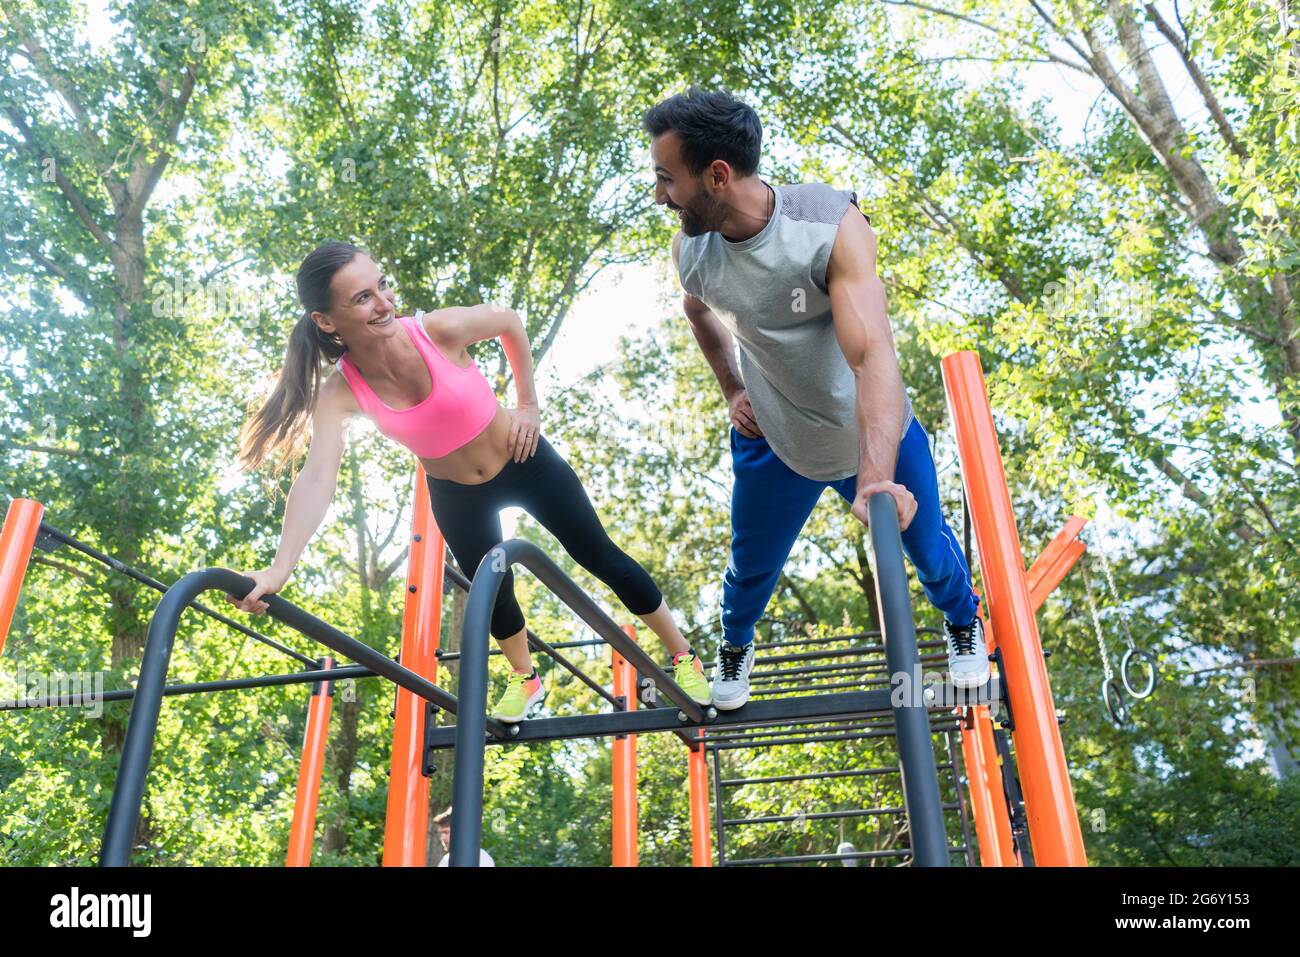 Low-angle view of a young fit woman and her partner smiling while practicing plank exercise during outdoor couple workout in a calisthenics park Stock Photo